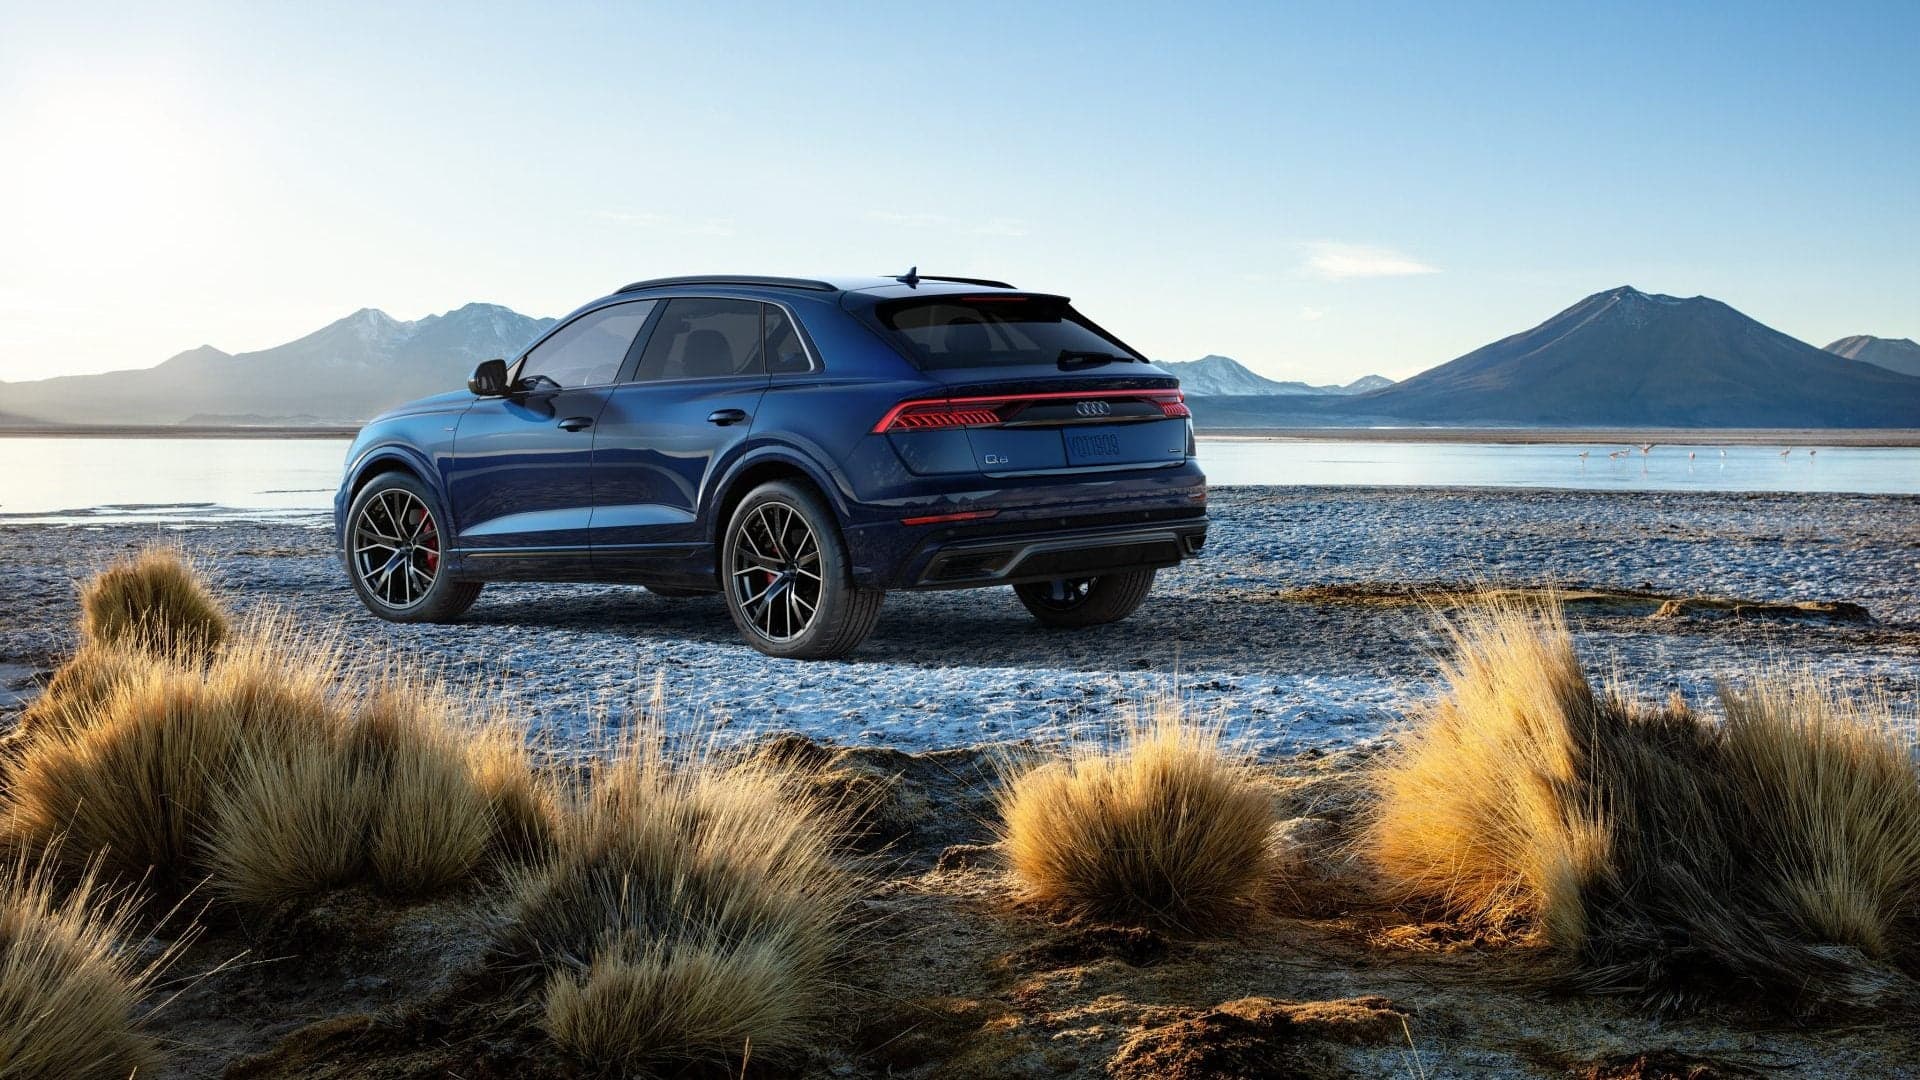 2019 Audi Q8: In Case Your Family Isn’t Q7-Sized